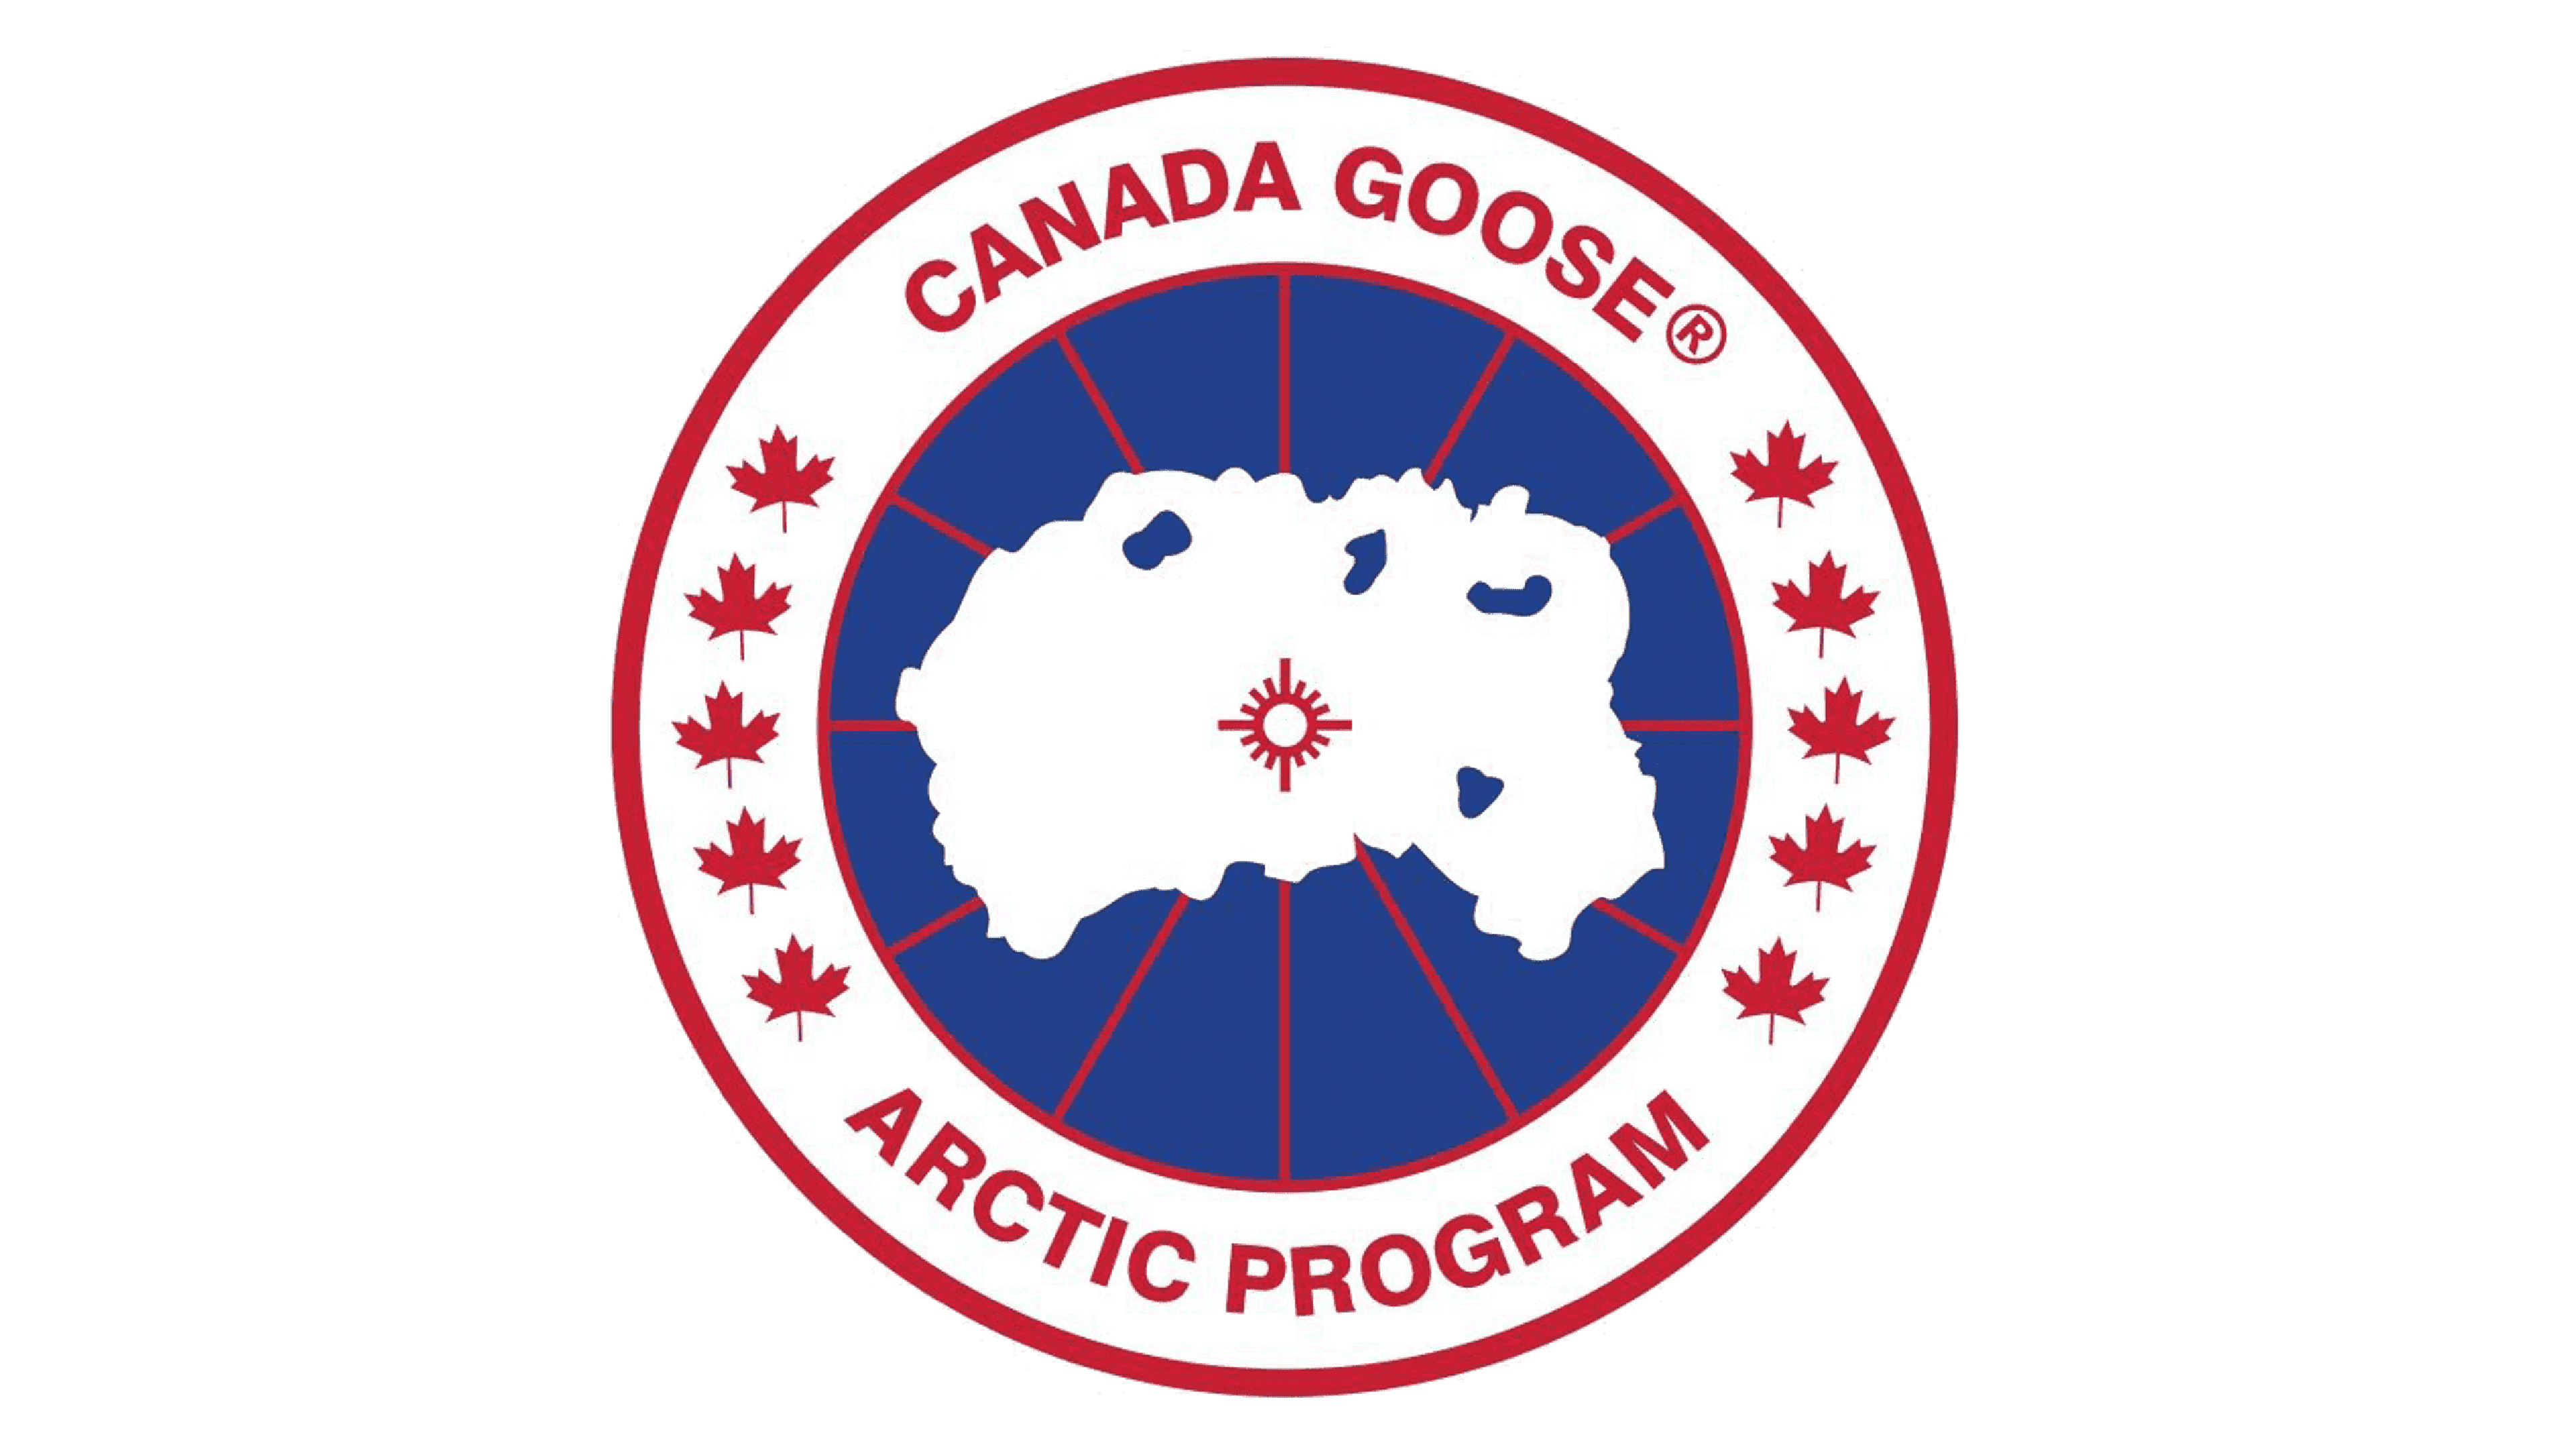 https://riggsdrycleaning.co.uk/wp-content/uploads/2023/02/Canada-Goose-logo.png